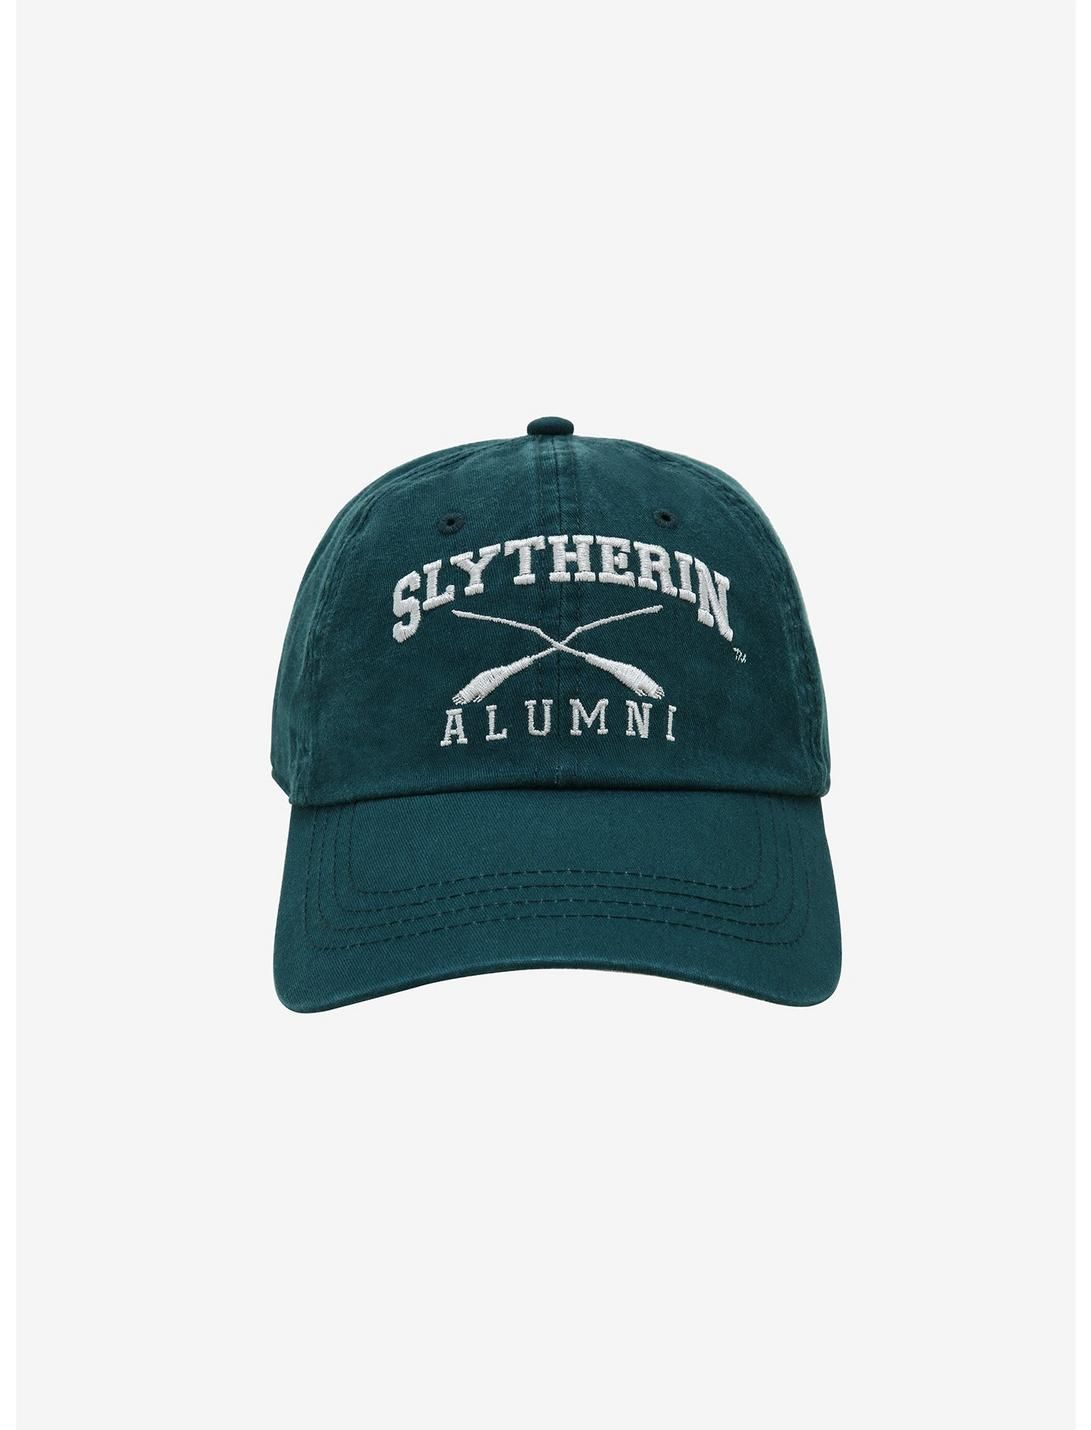 Harry Potter Slytherin Alumni Cap - BoxLunch Exclusive | BoxLunch